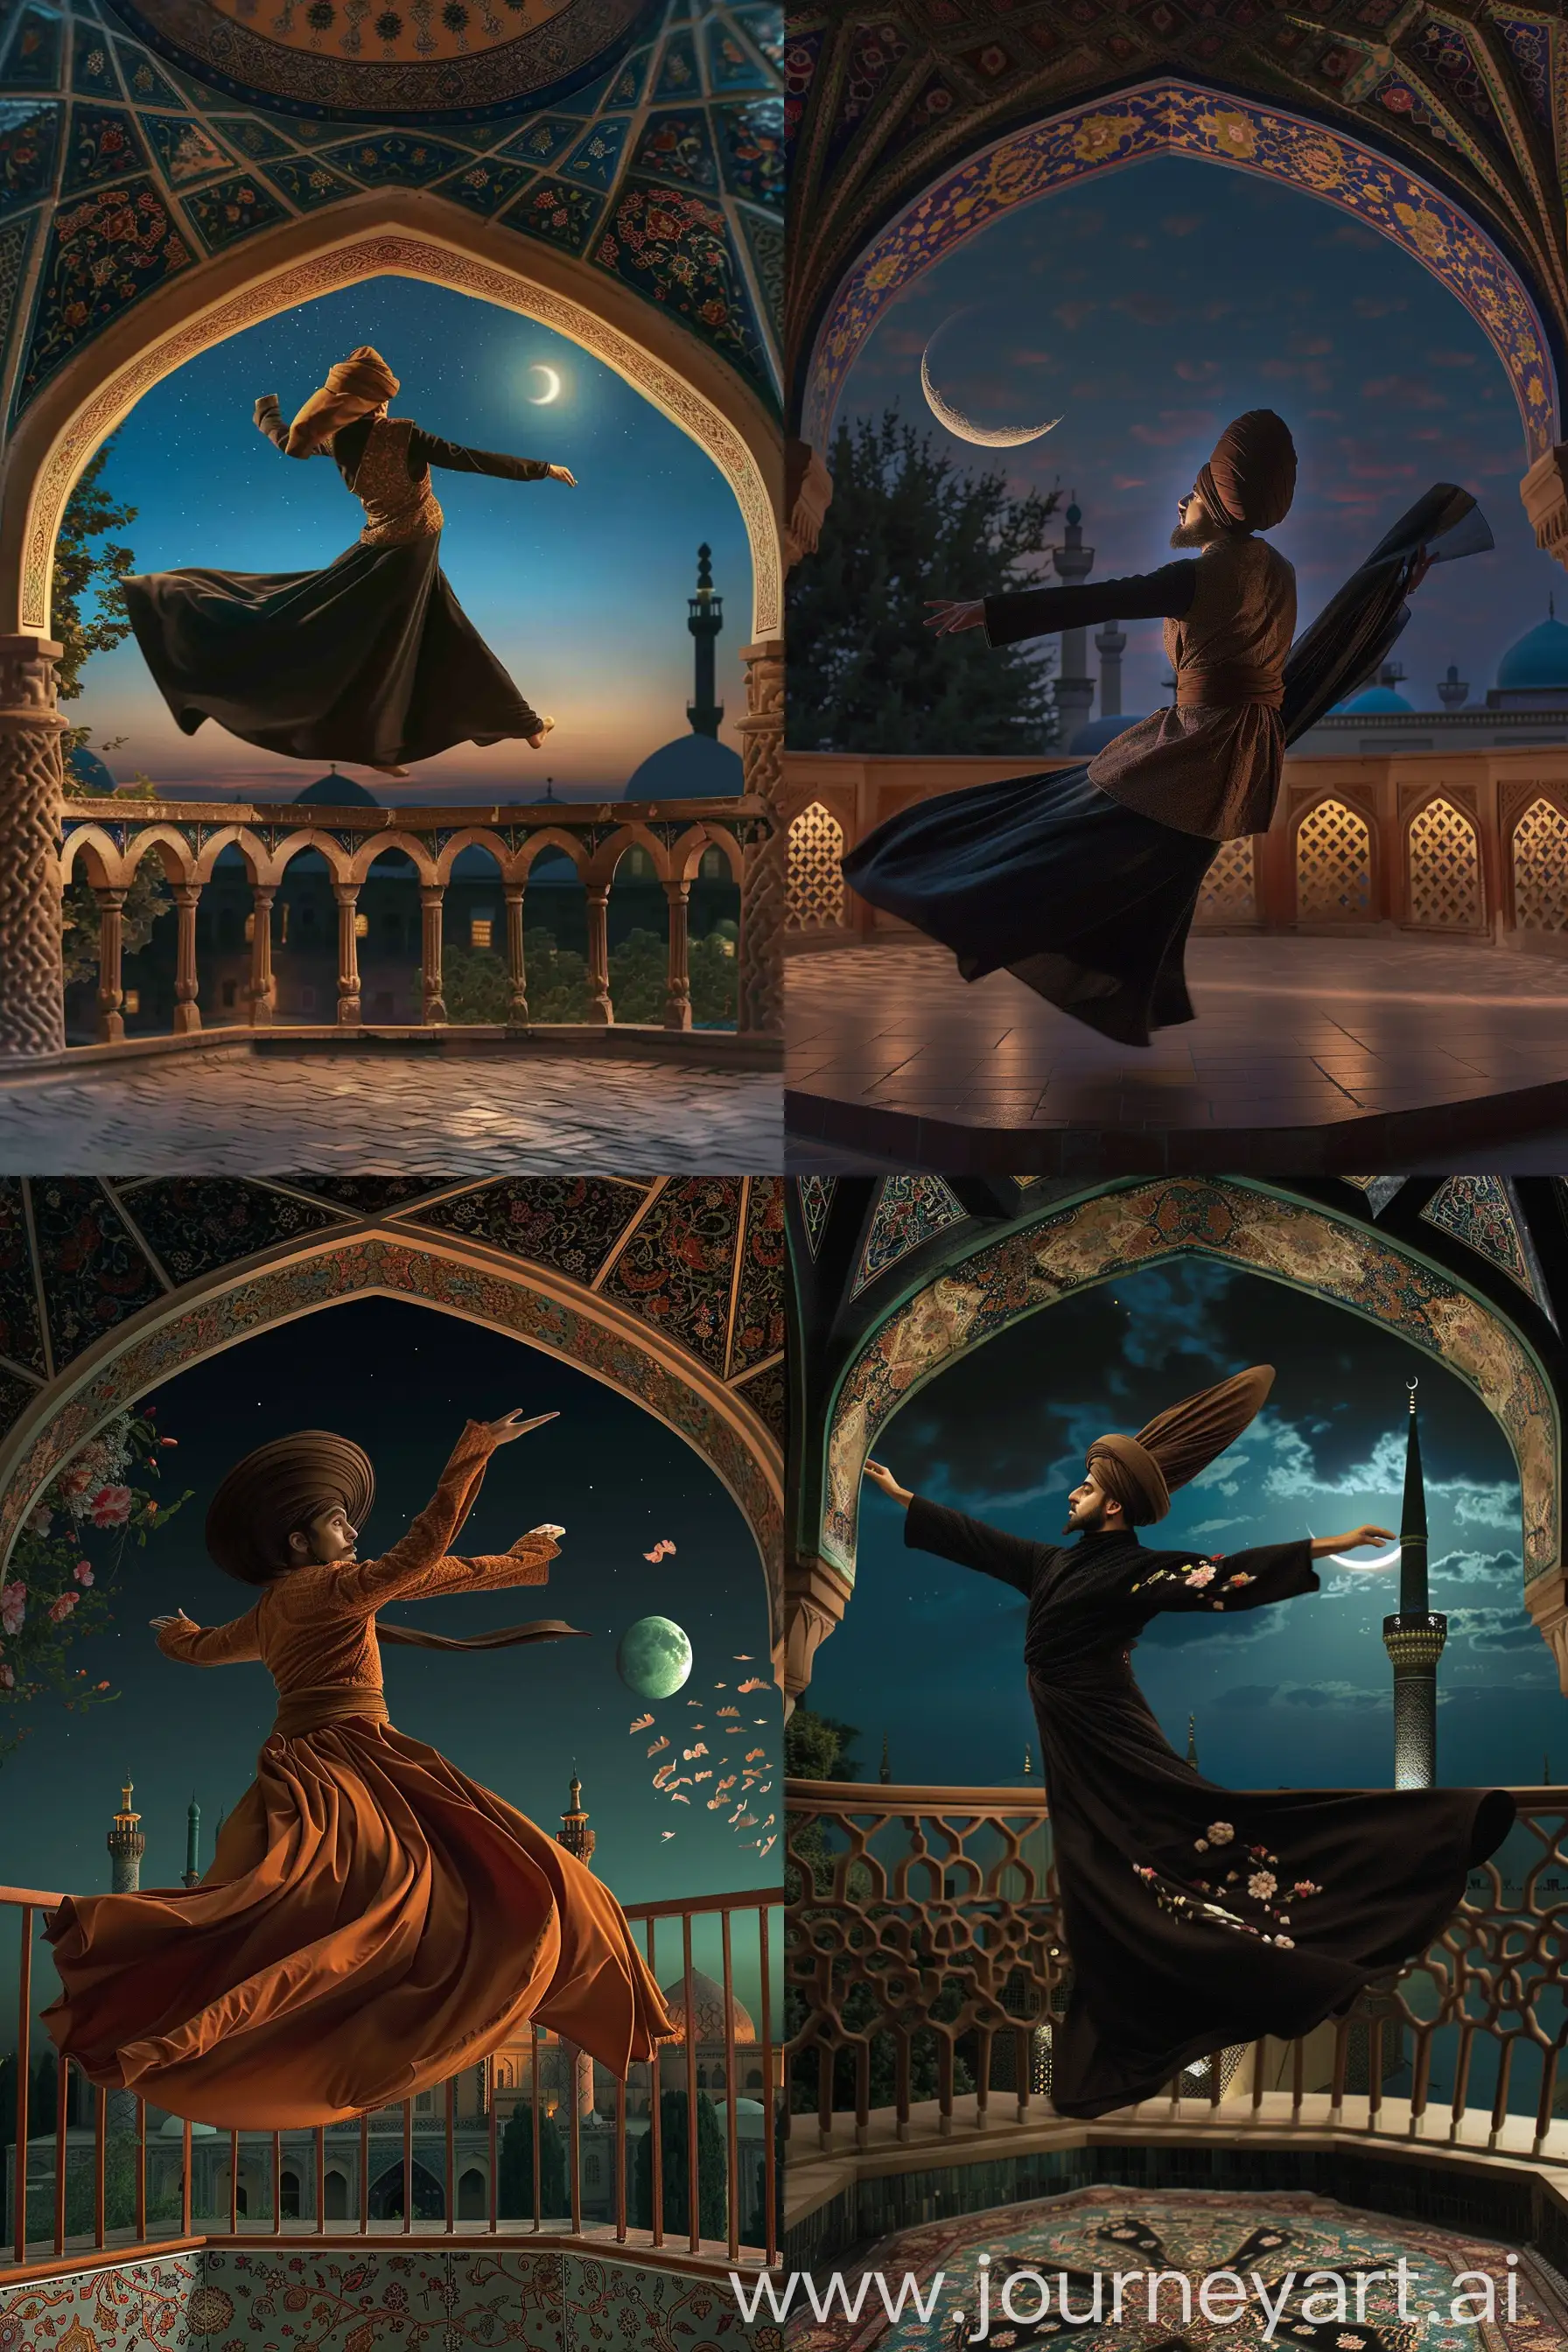 A mesmerizing moment of a Whirling Dervish in mid-spin, traditional tennure flowing dramatically, tall brown sikke hat, inside an octagonal balcony having arches decorated with persian floral motifs, serene night sky with a cresent moon, view of Persian tiled mosque --ar 2:3